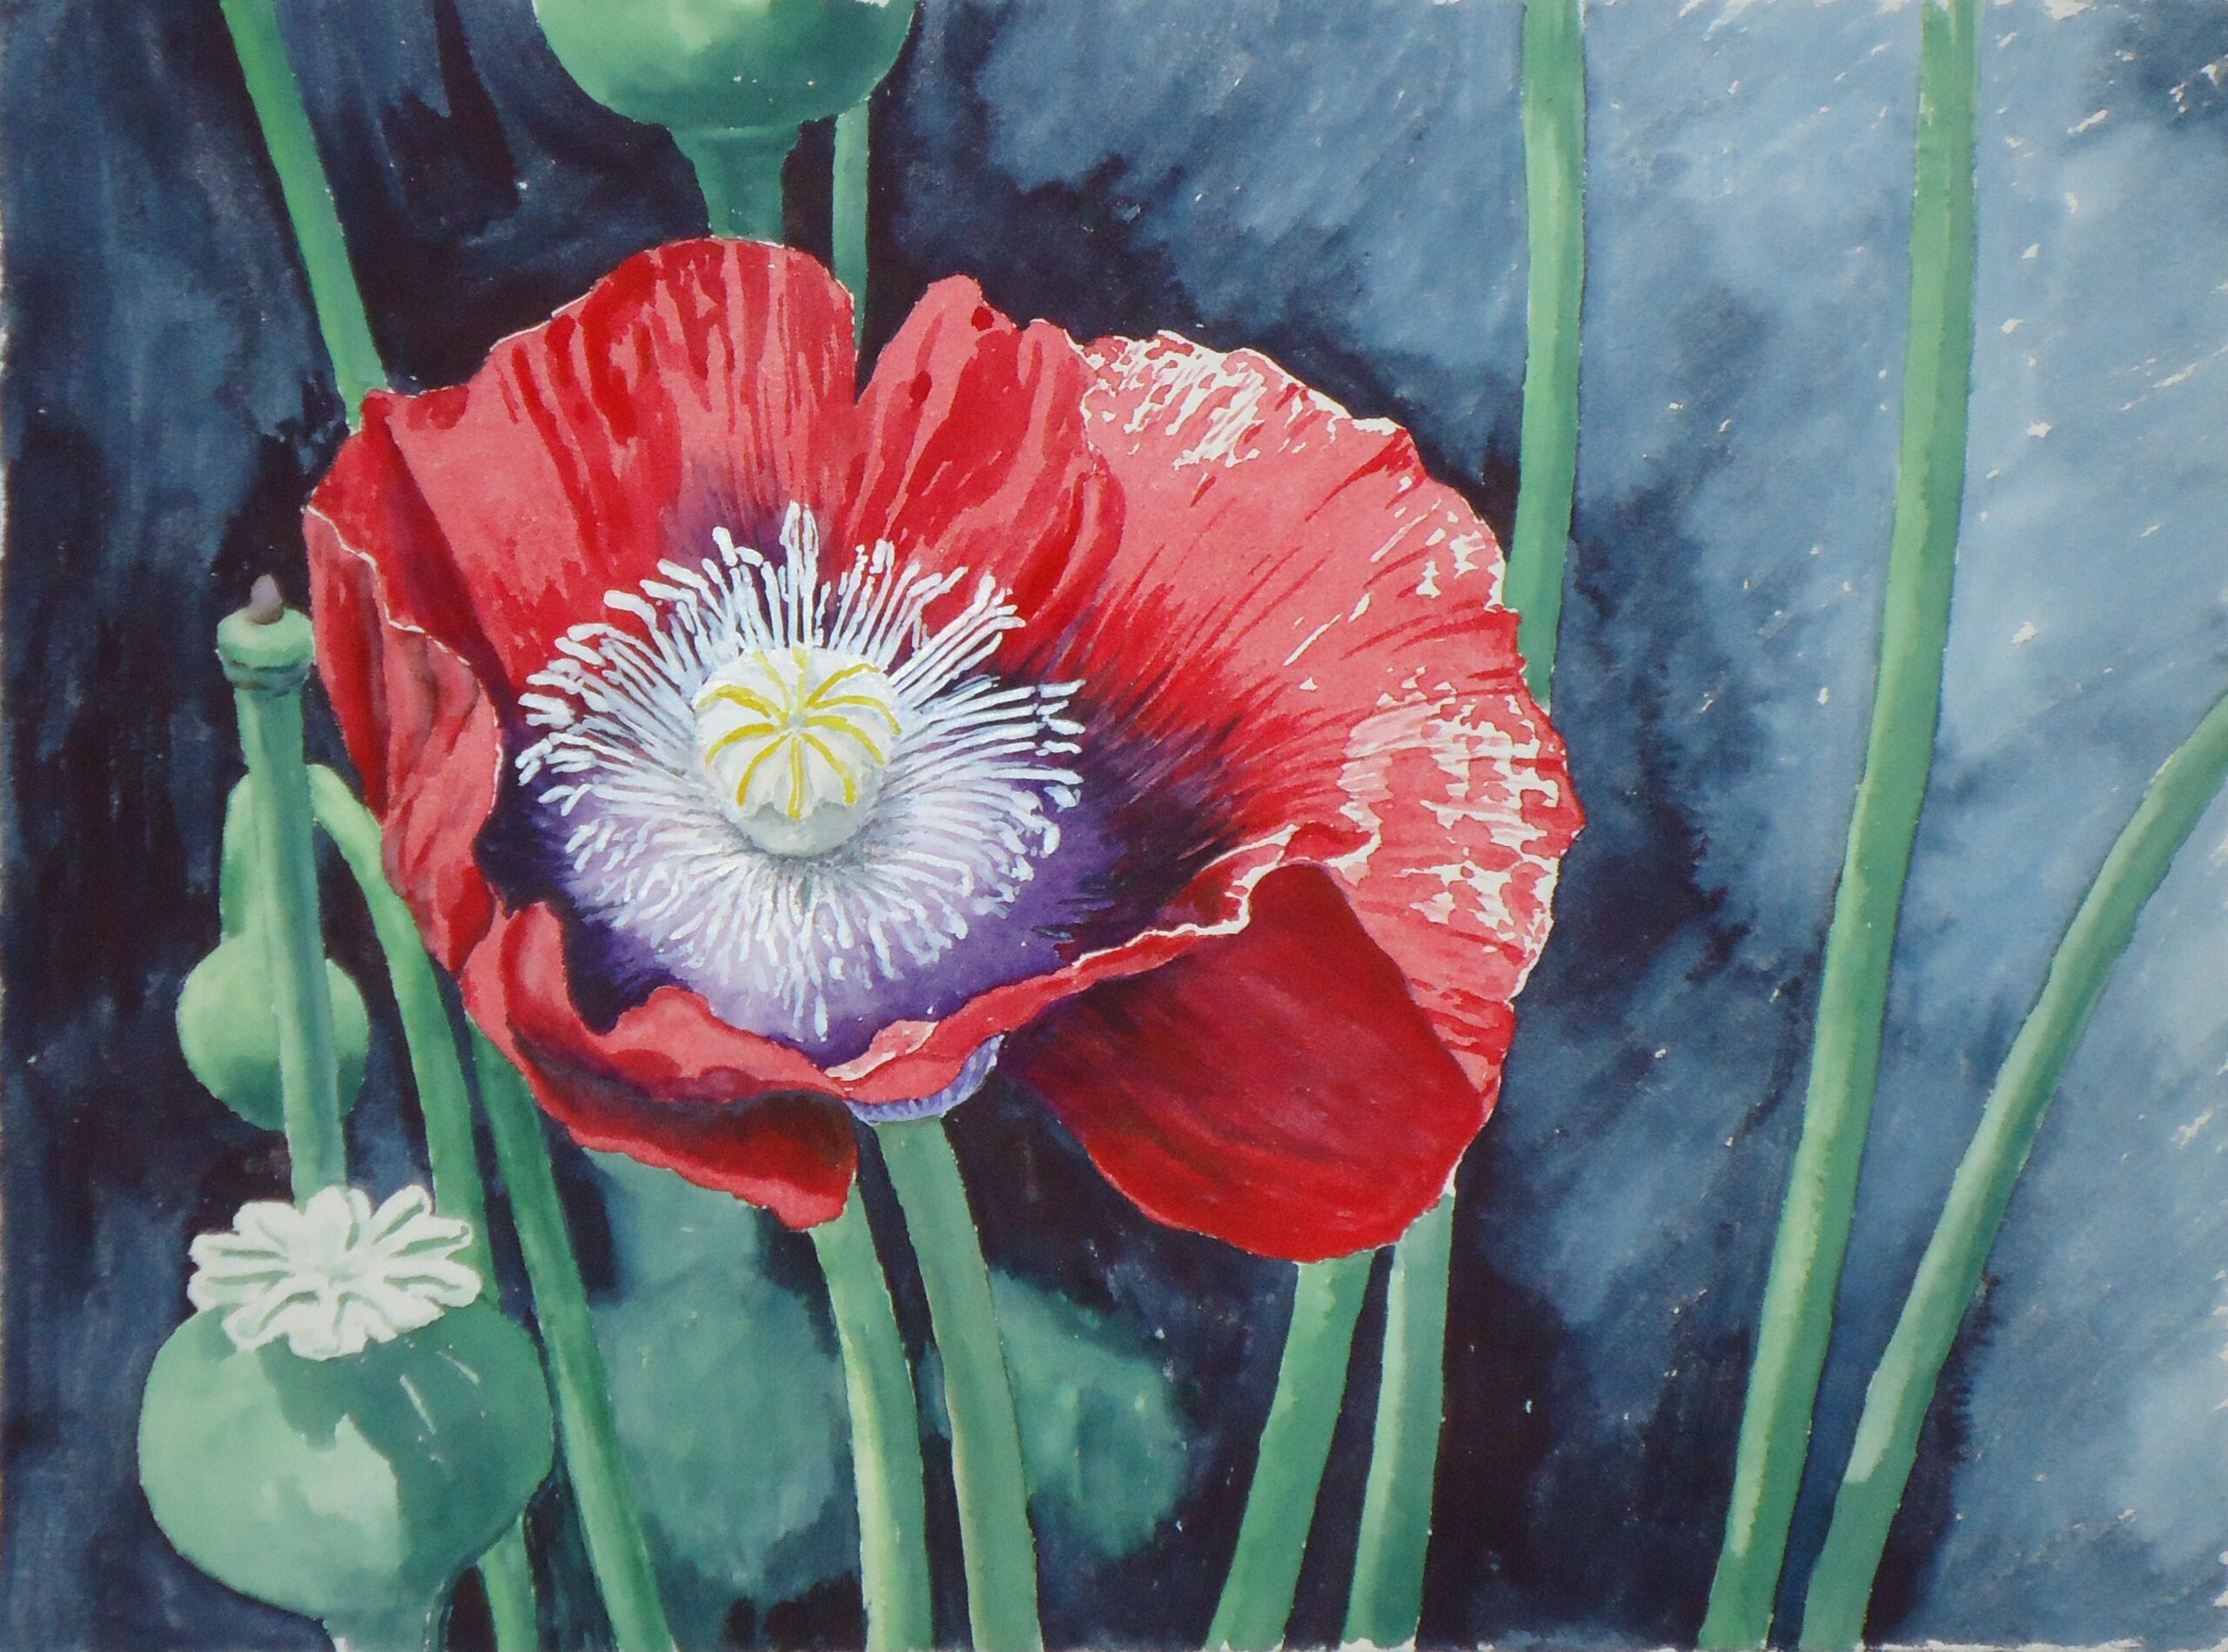 A water colour painting of a red poppy by Keith Cains.